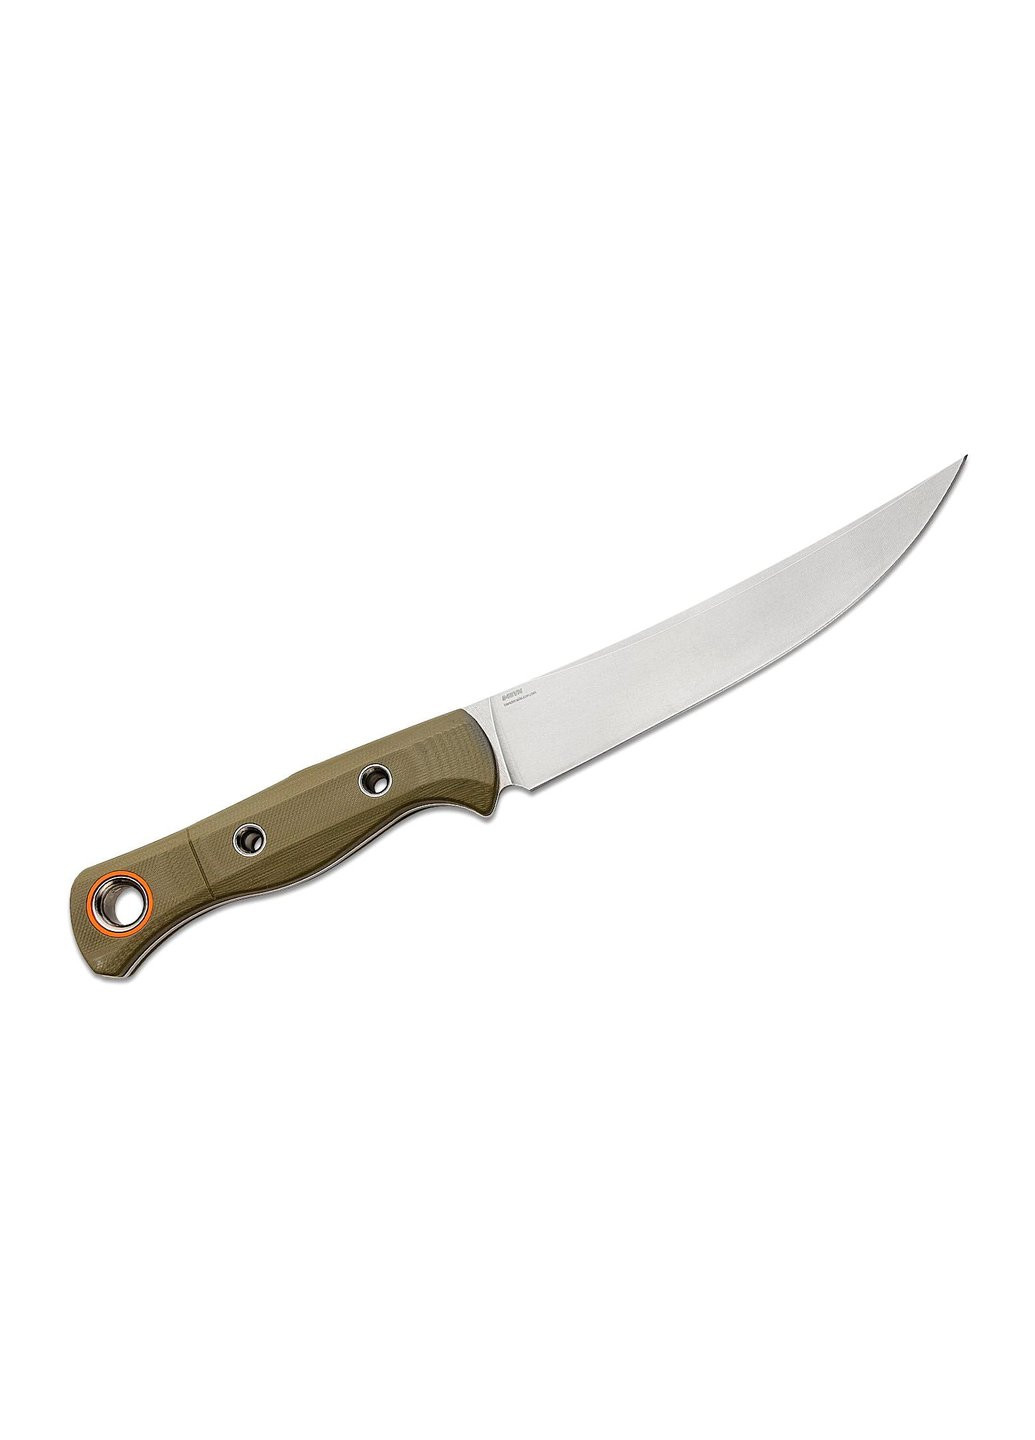 Нож Meatcrafter Olive G10 (15500-3) Benchmade (257257110)